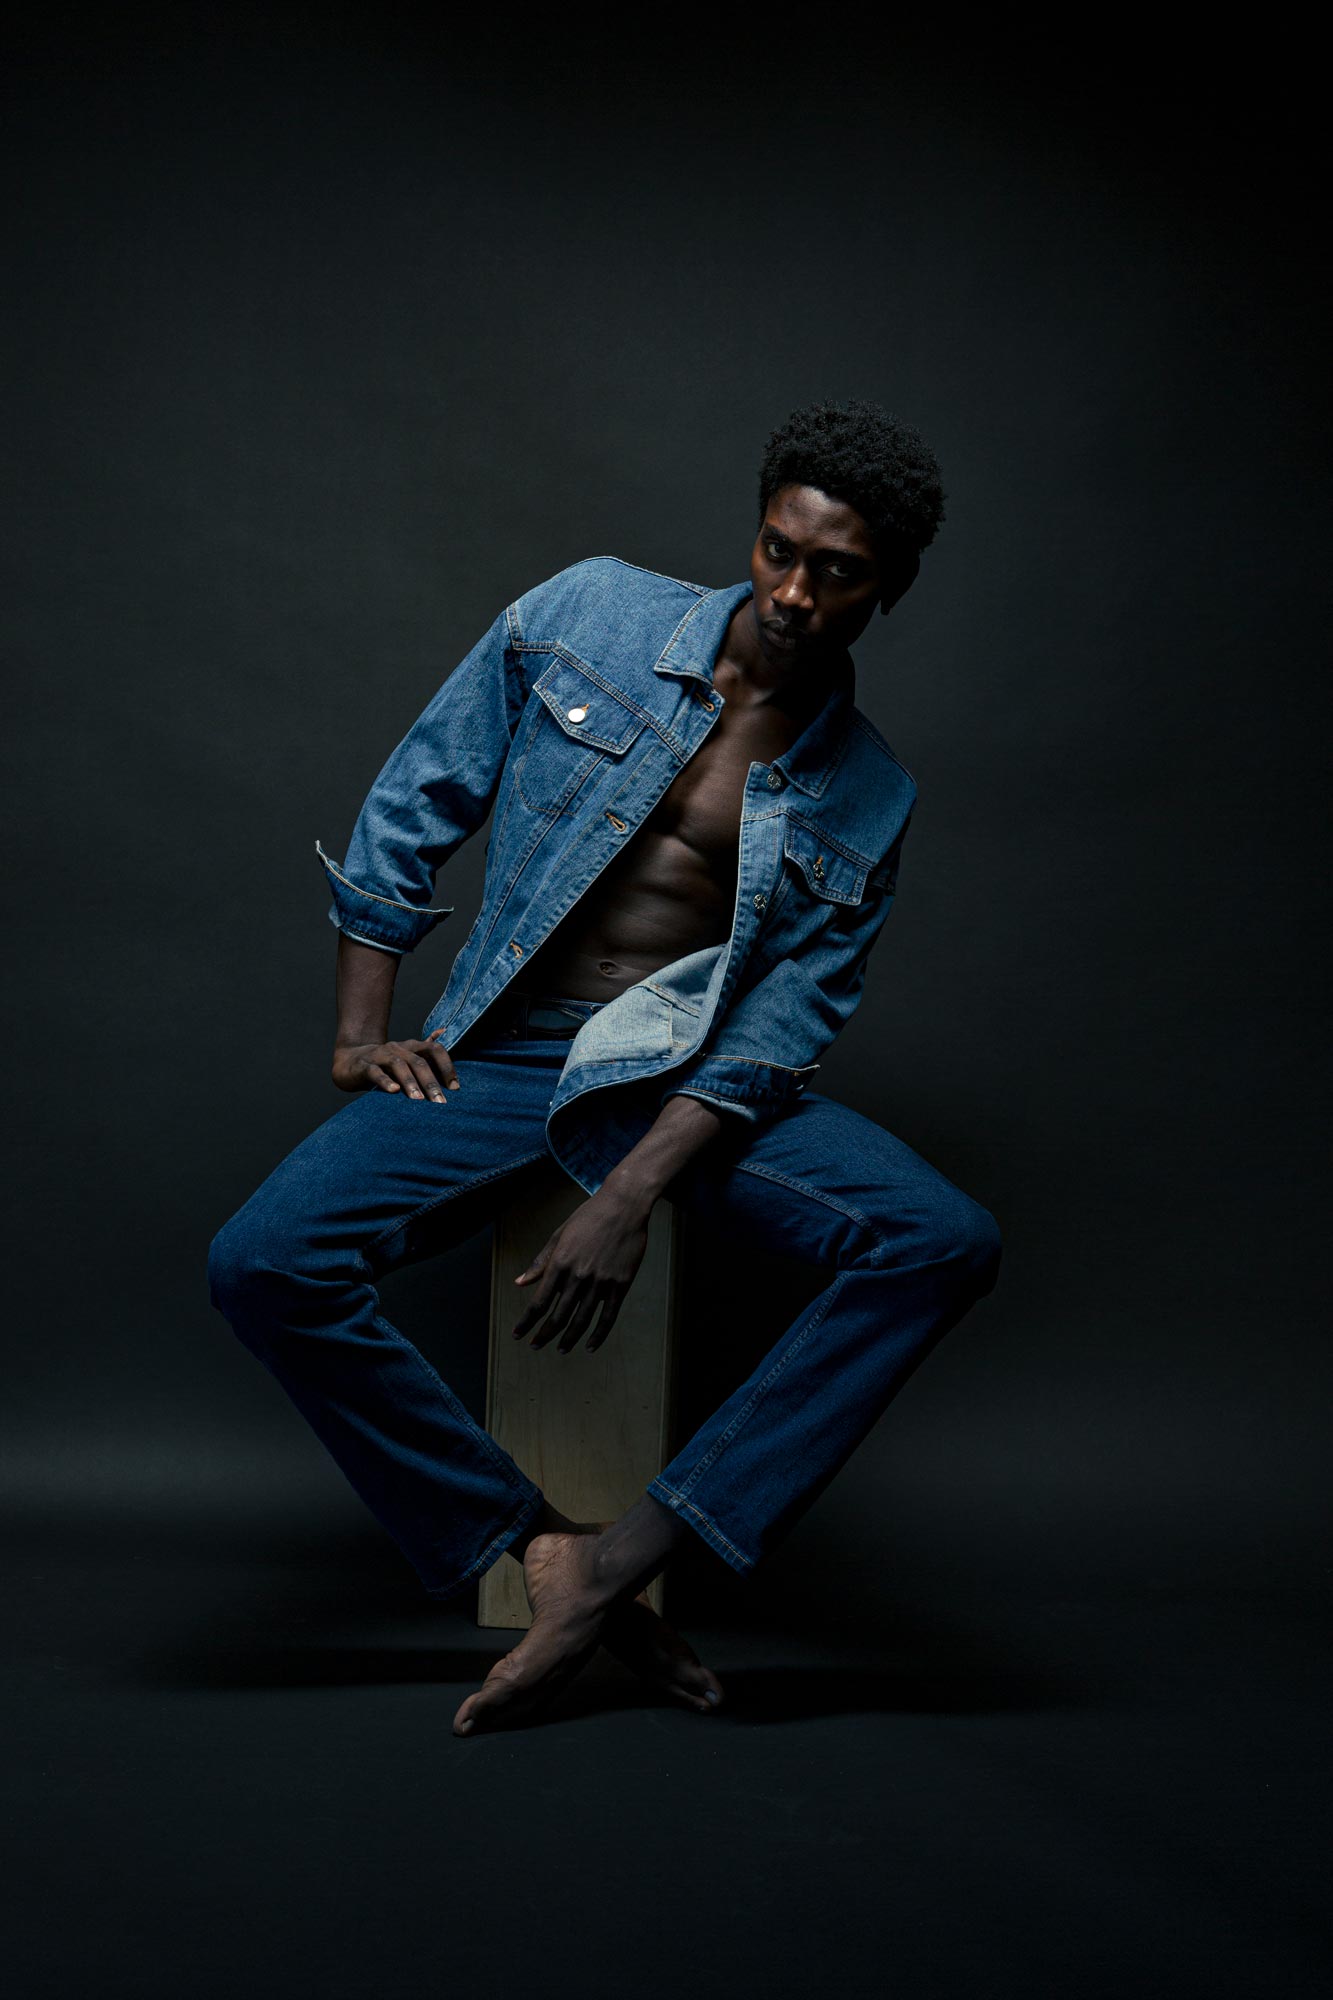 Ekow Botchway posing for a fashion photo shoot with Jeff Fried